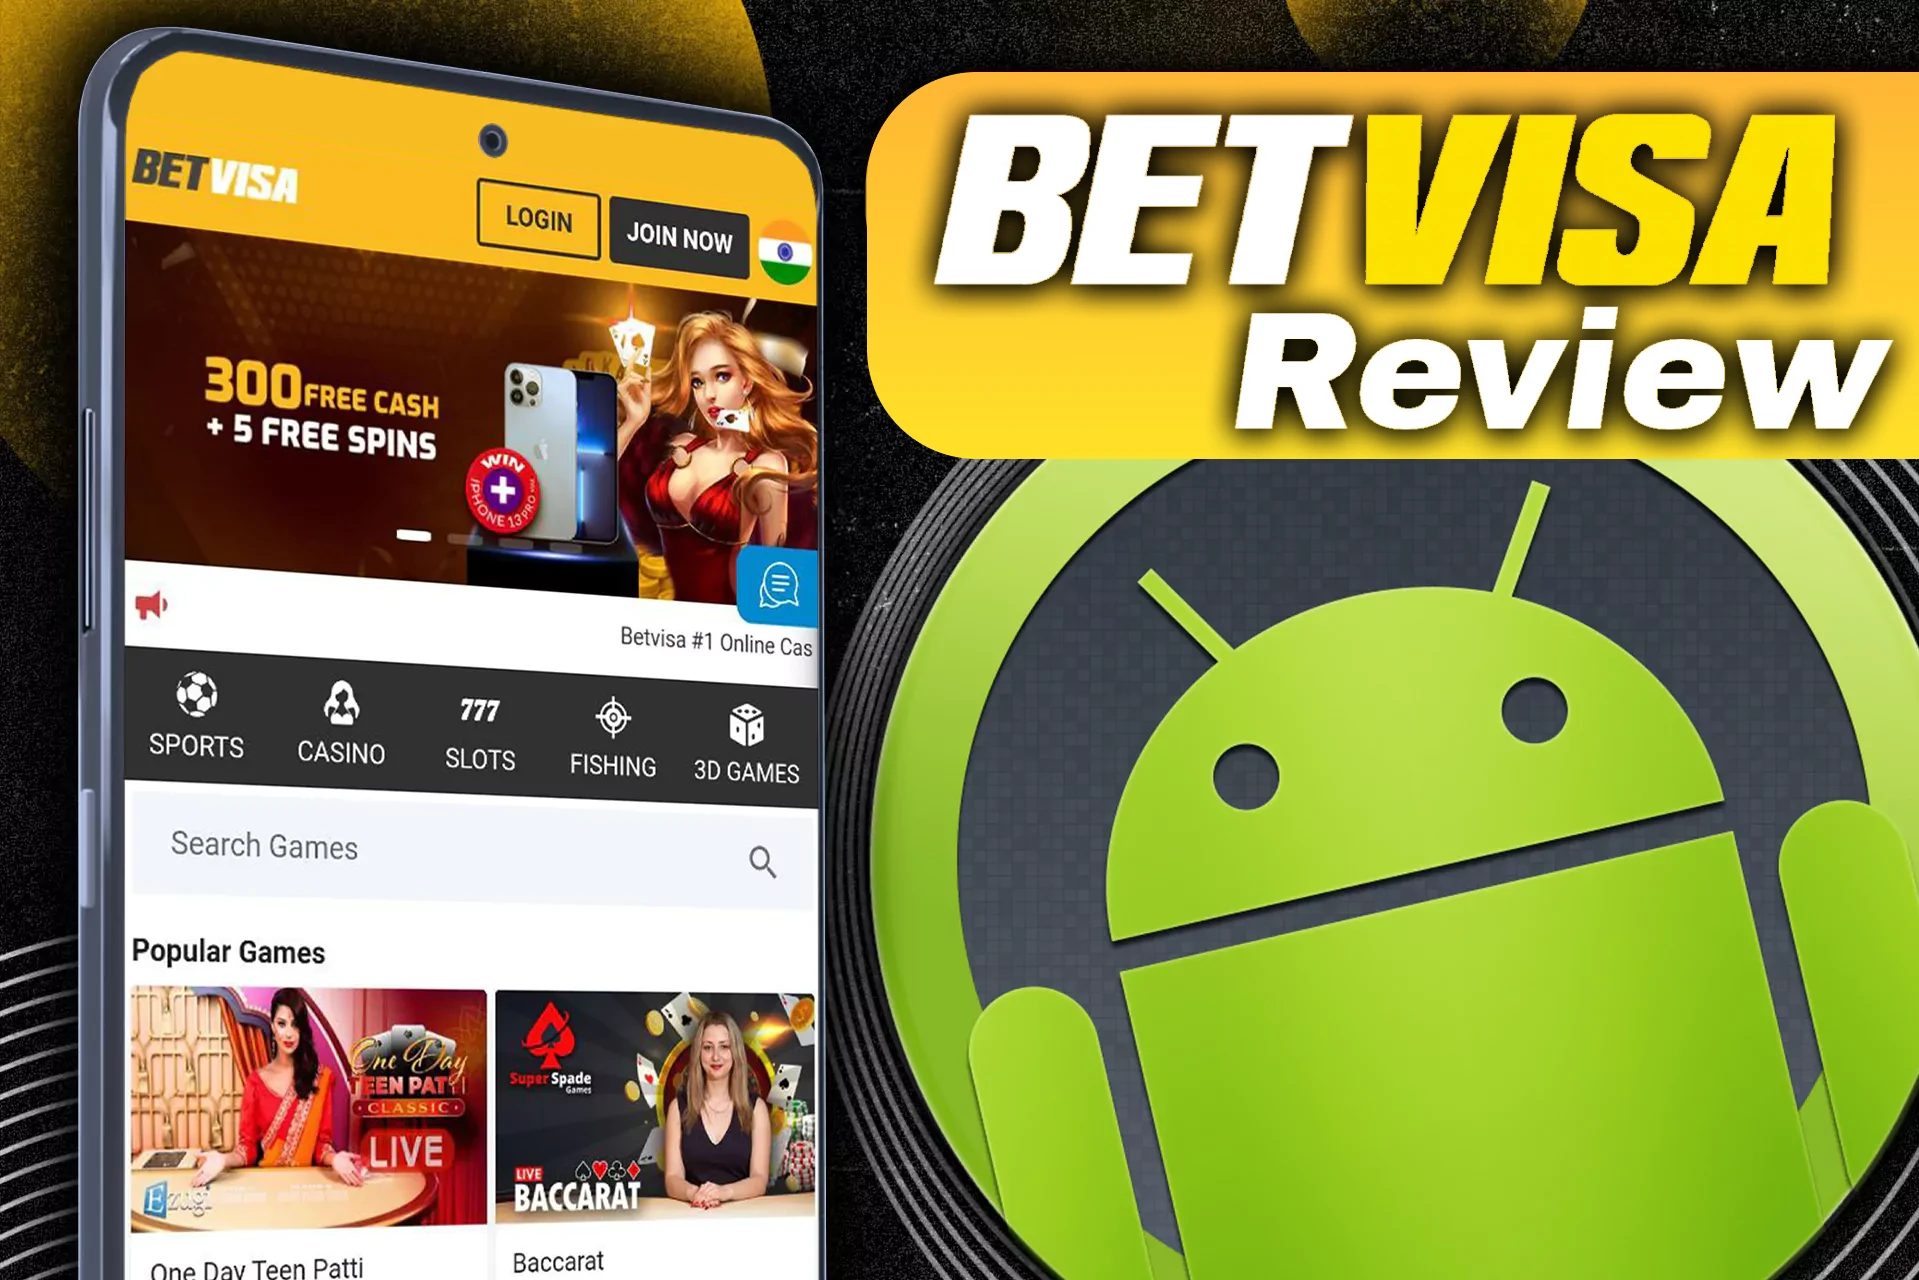 There is a great BetVisa app for the Android smartphones.